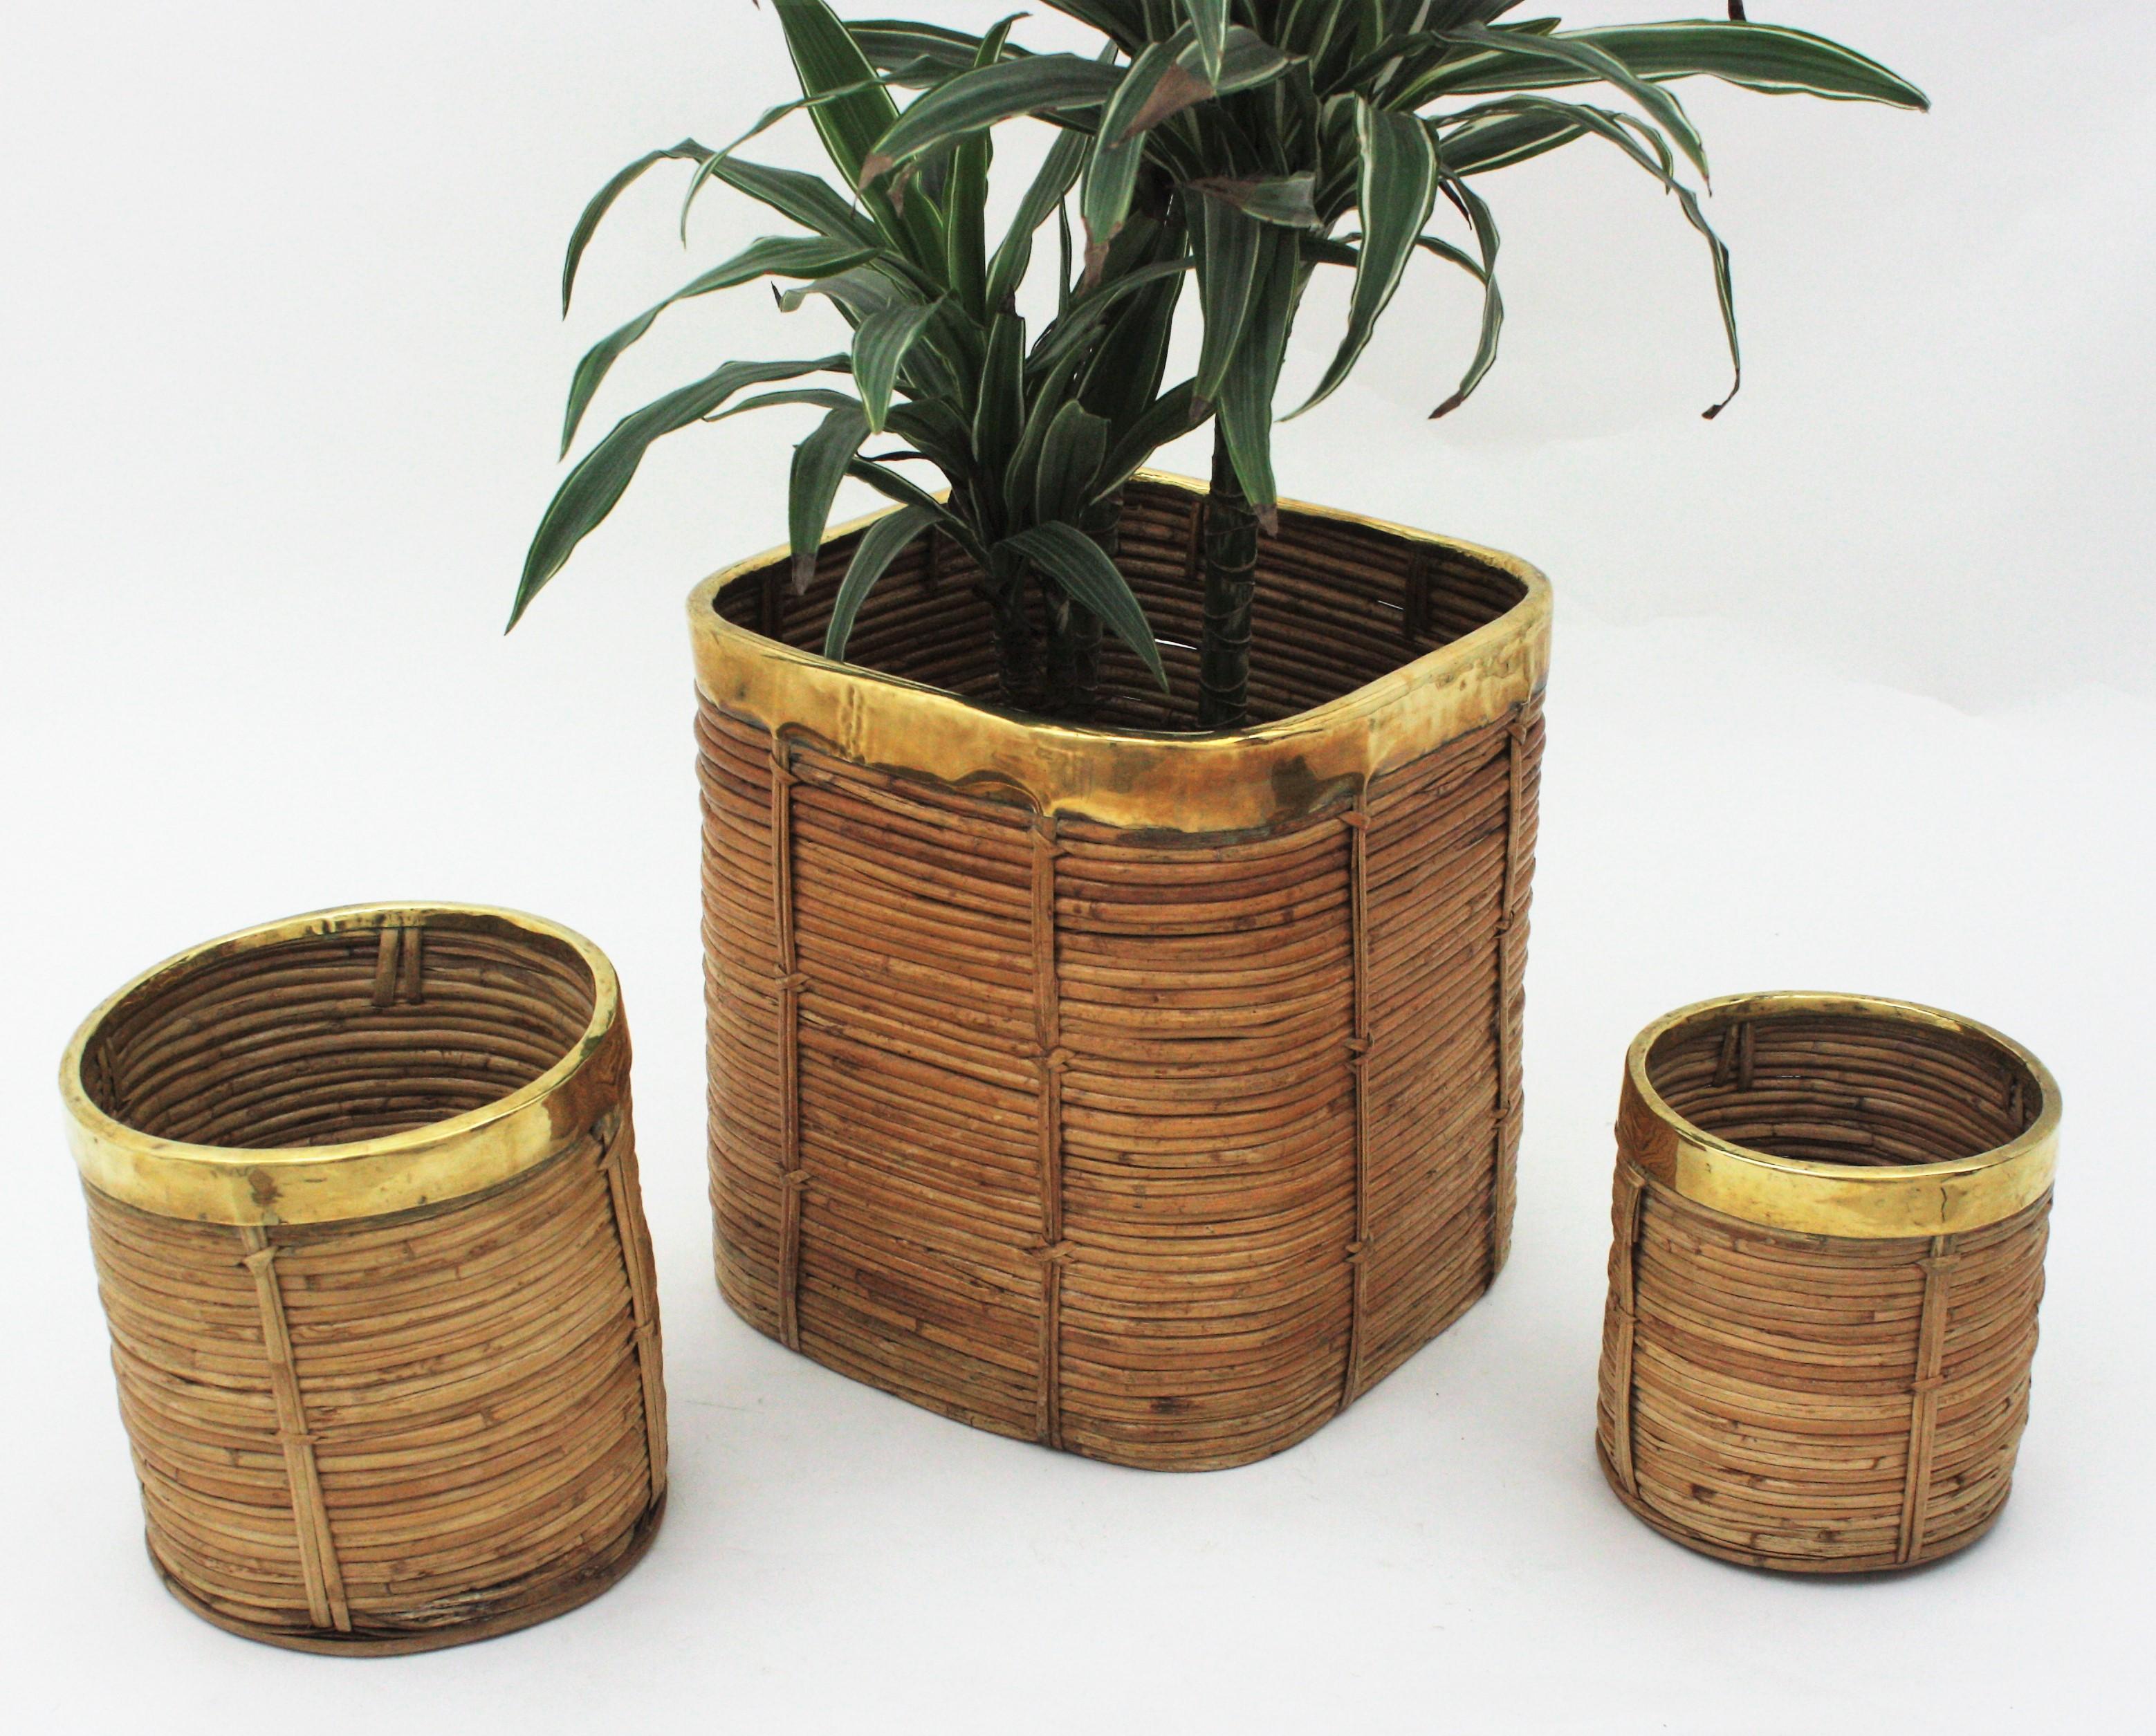 Three Rattan Bamboo Planters / Baskets with Brass Rim, Italy, 1970s For Sale 6